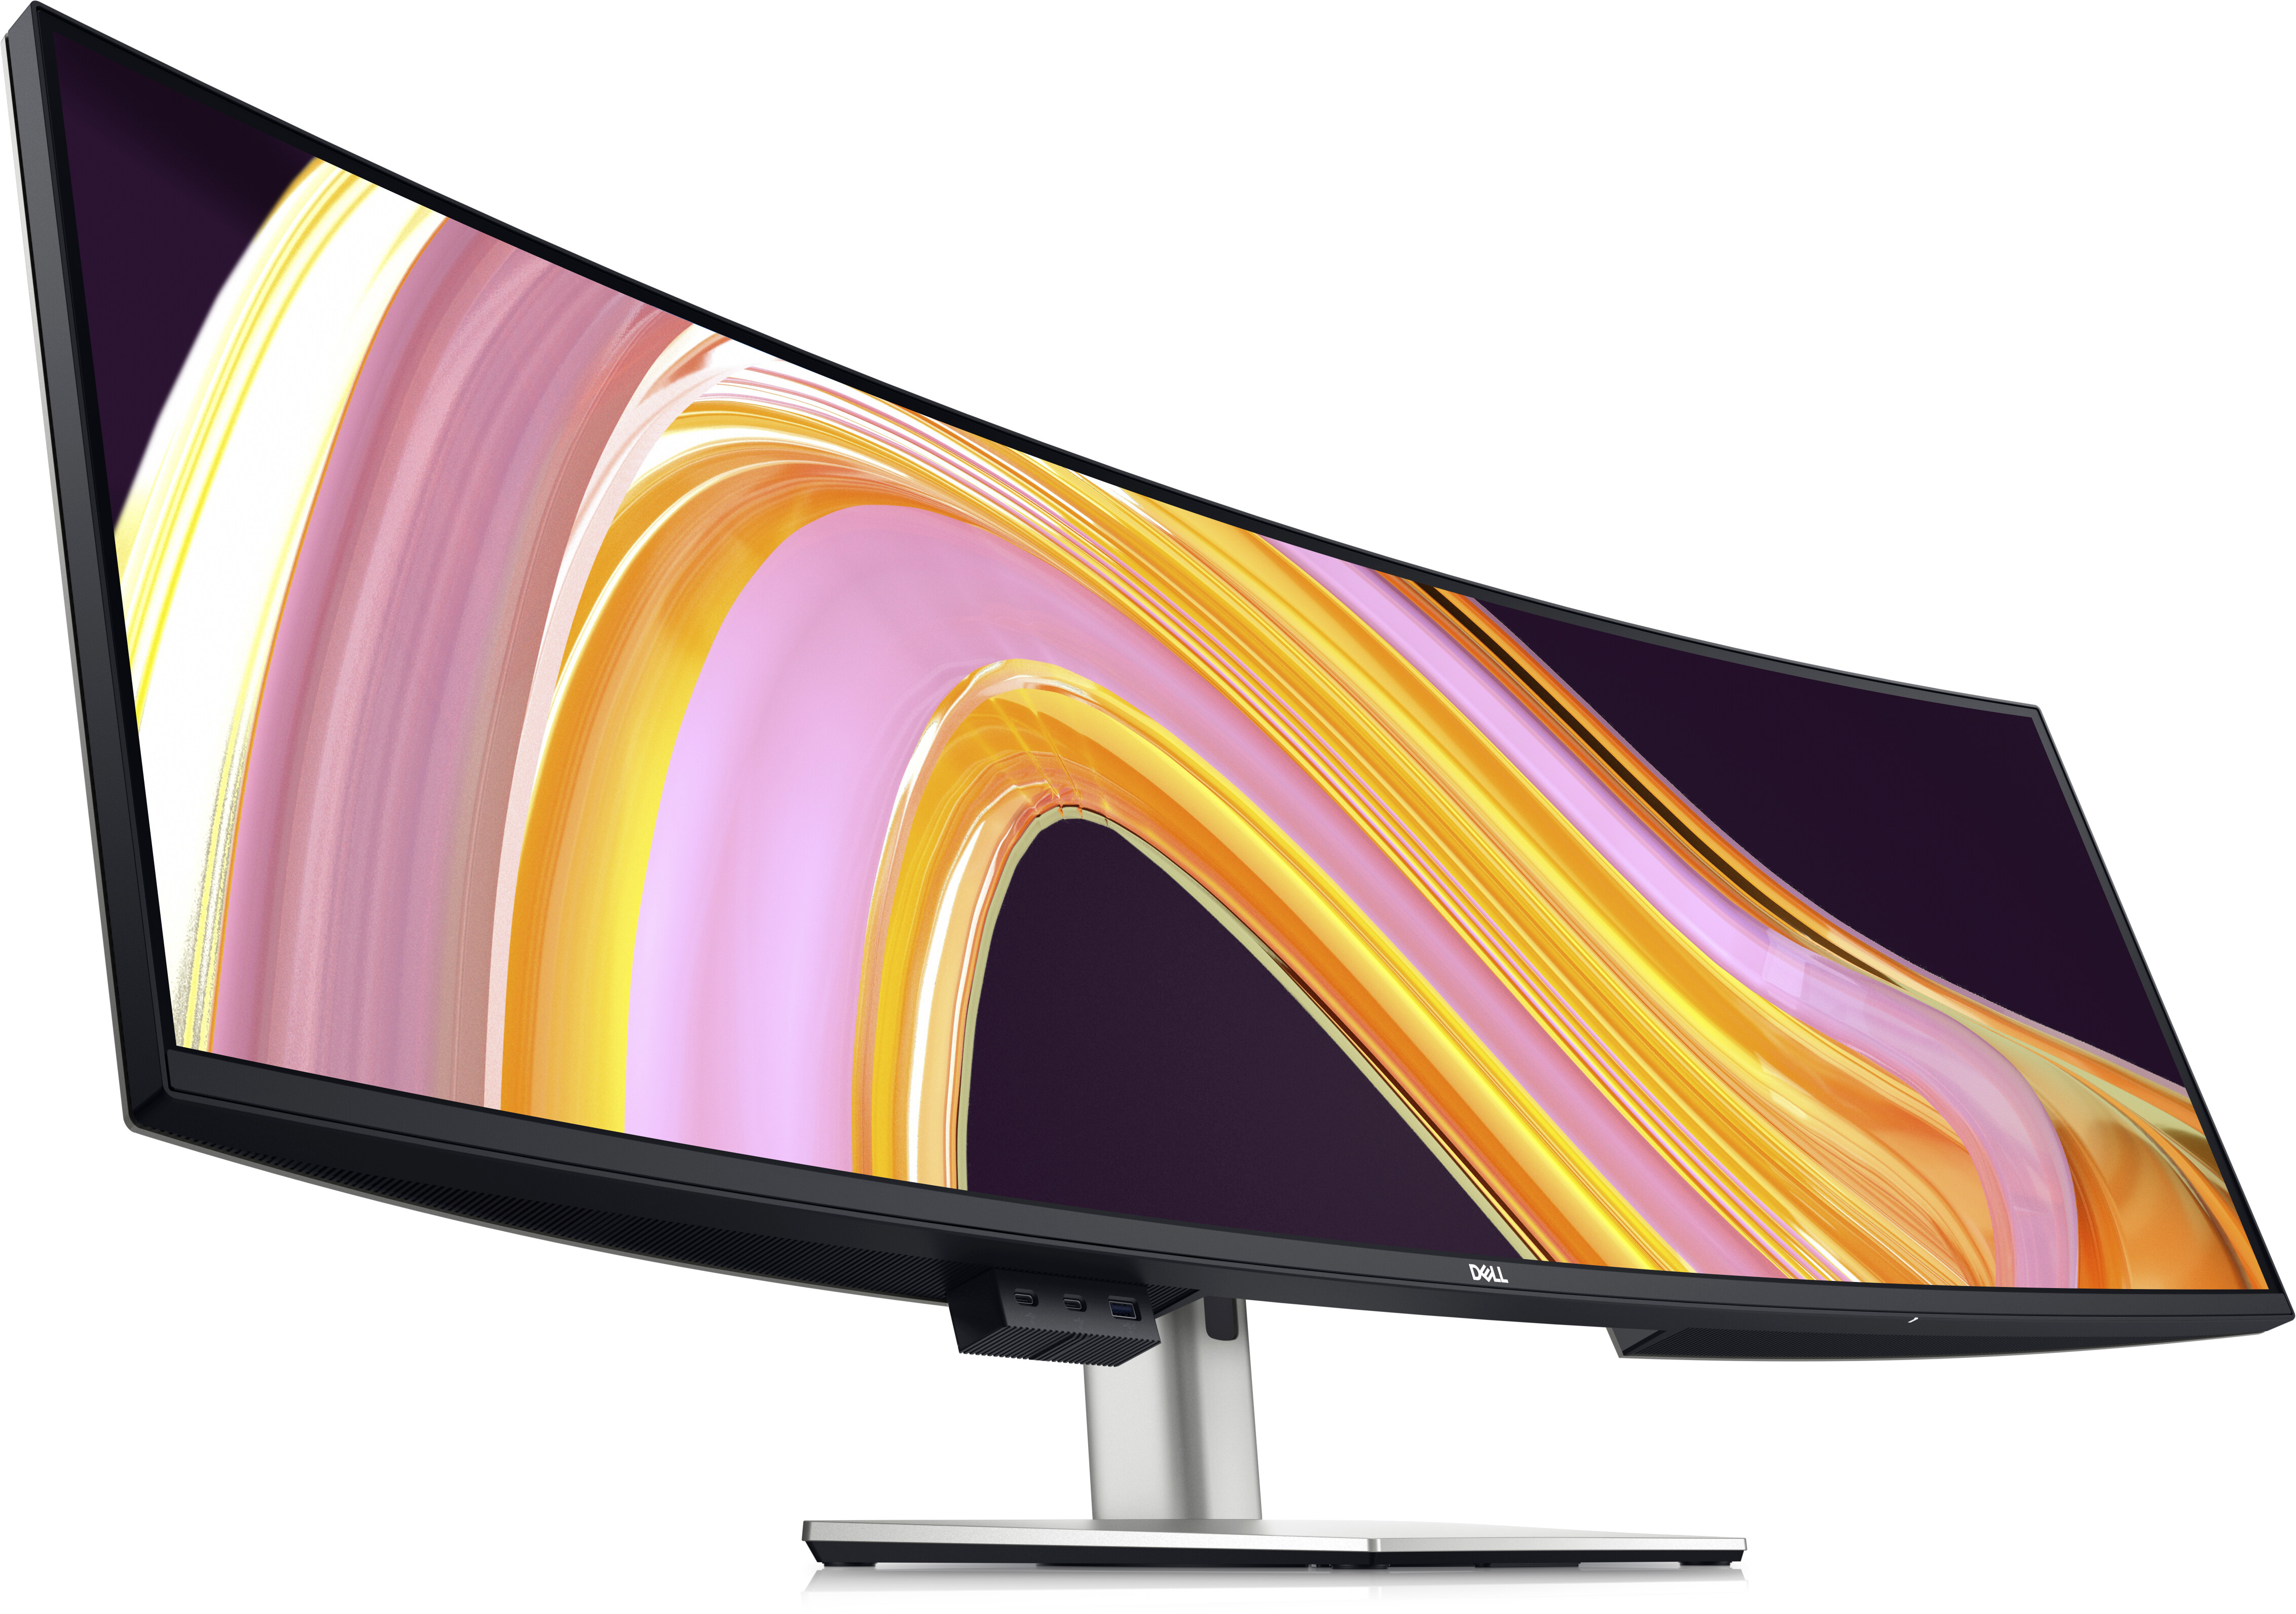 https://i.dell.com/is/image/DellContent/content/dam/ss2/product-images/dell-client-products/peripherals/monitors/u-series/u4924dw/media-gallery/monitor-u4924dw-gray-gallery-1.psd?fmt=pjpg&pscan=auto&scl=1&wid=4530&hei=3184&qlt=100,1&resMode=sharp2&size=4530,3184&chrss=full&imwidth=5000